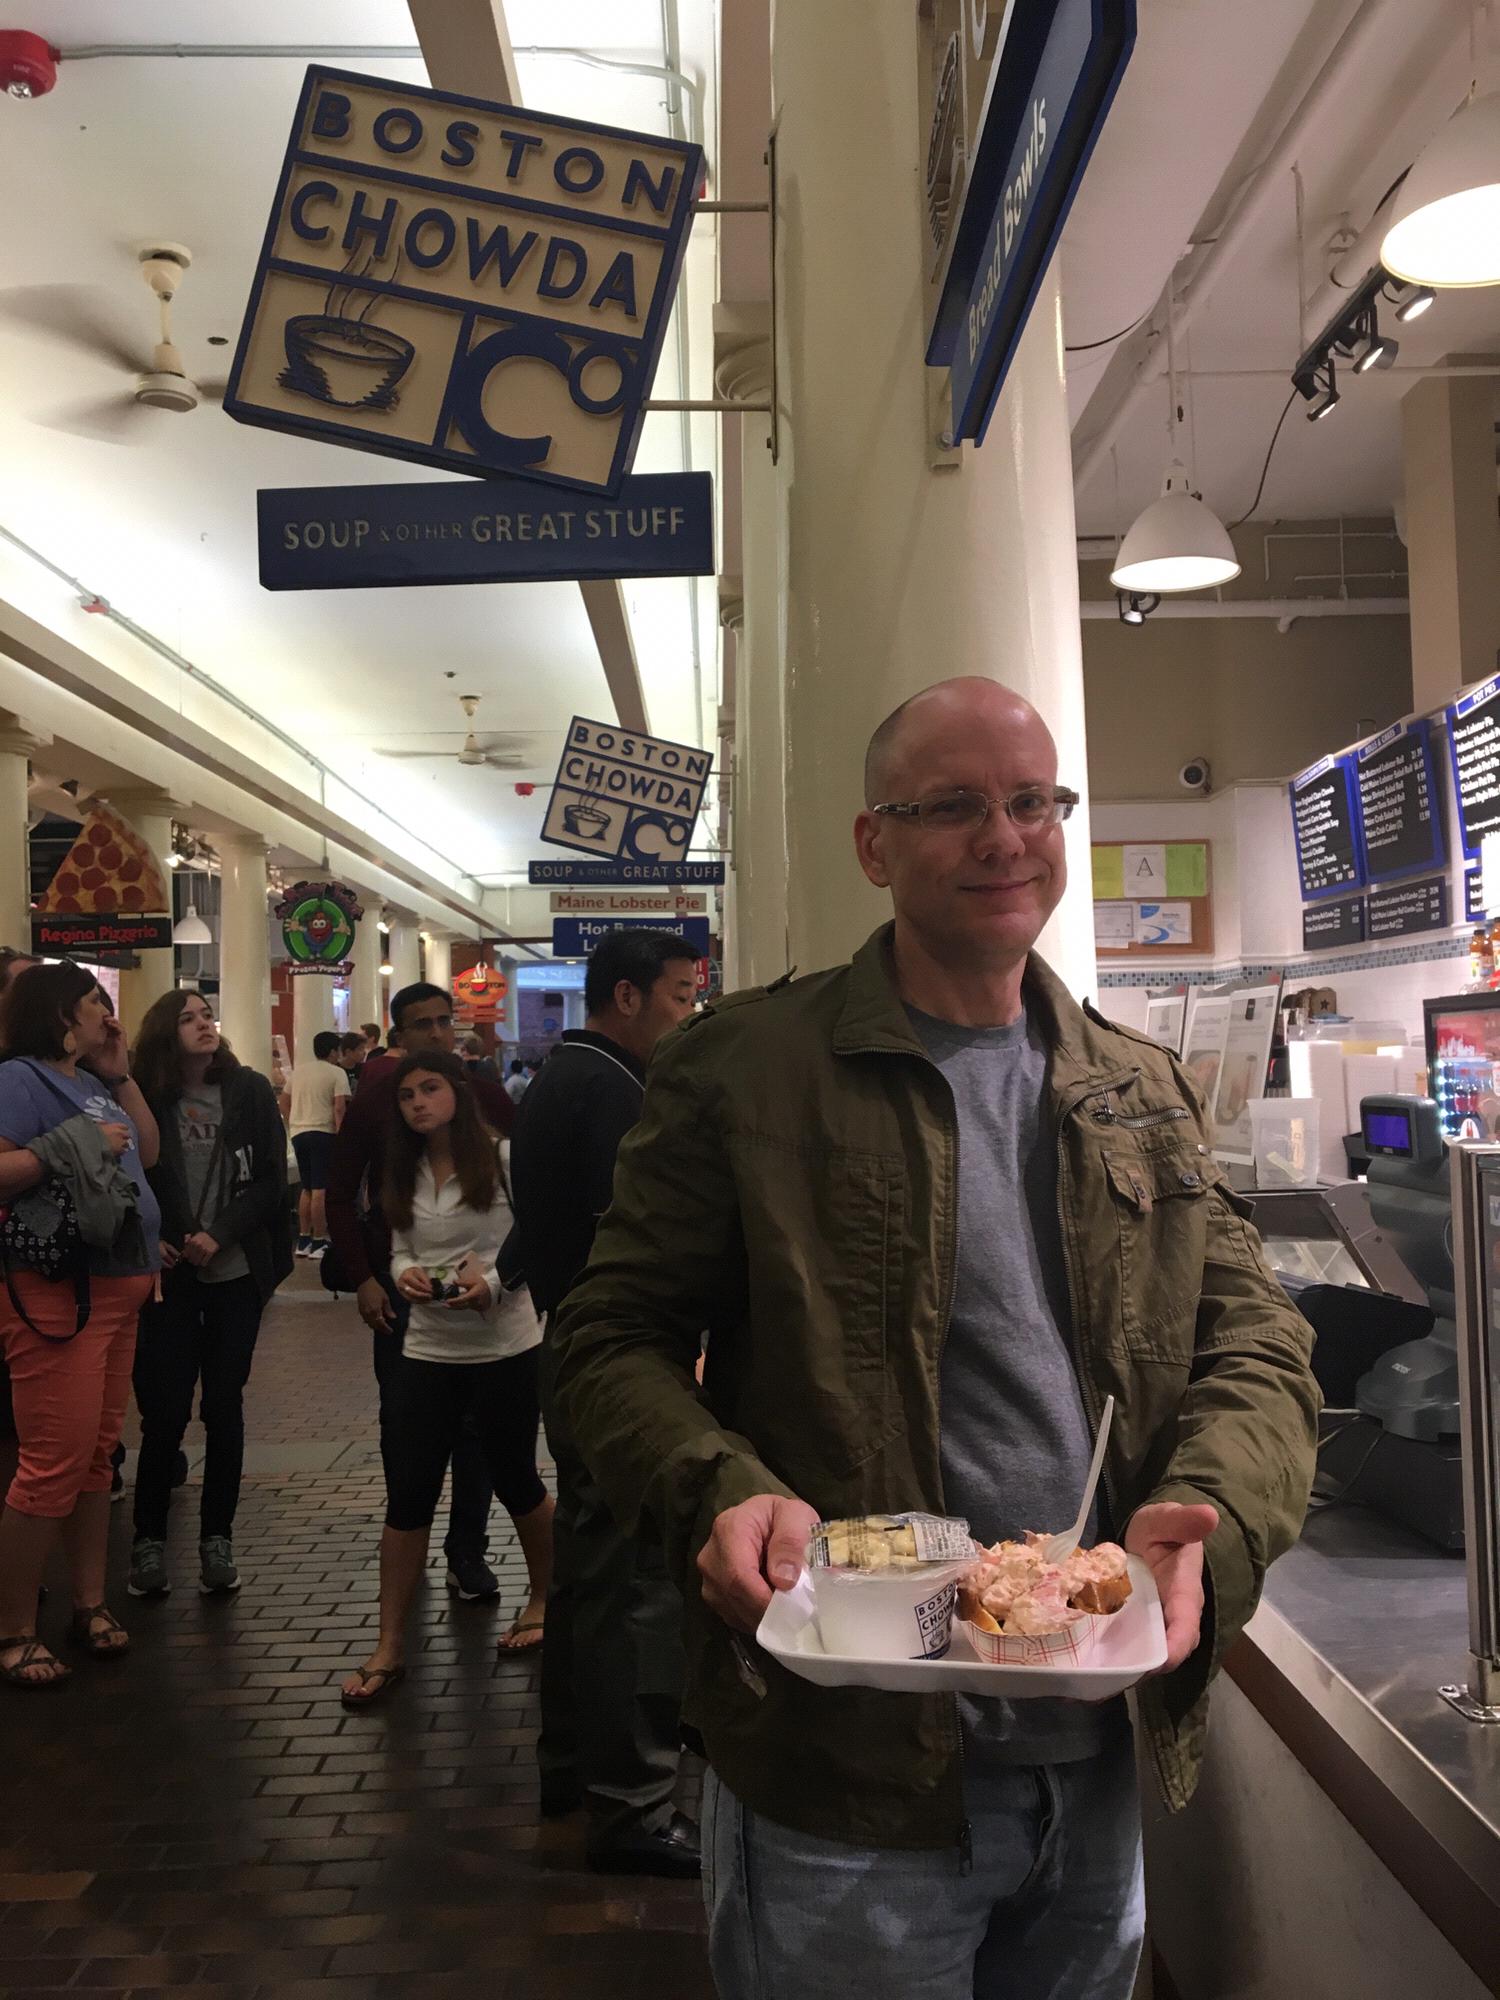 His first trip to Boston- grabbing a lobstah roll from Boston Chowda- June 2018